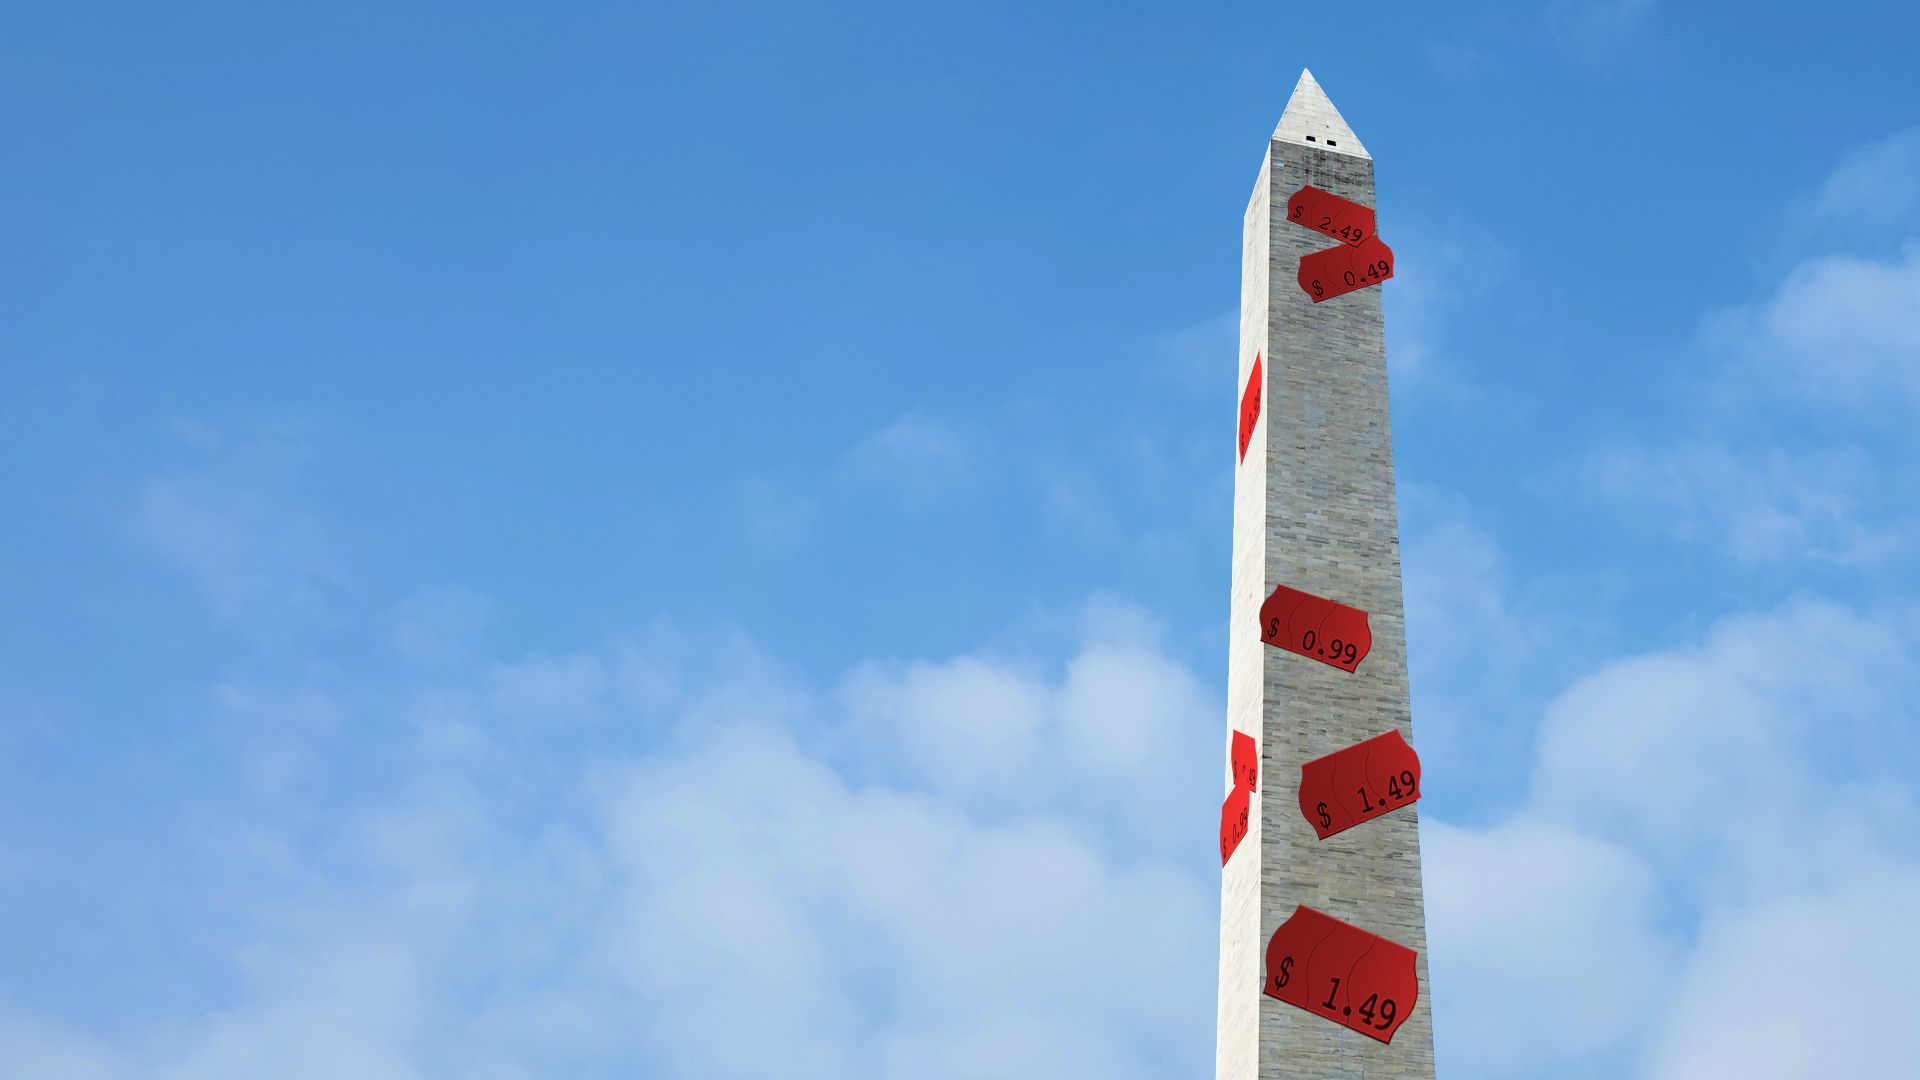 Illustration of the Washington monument ccovered in red sale stickers.